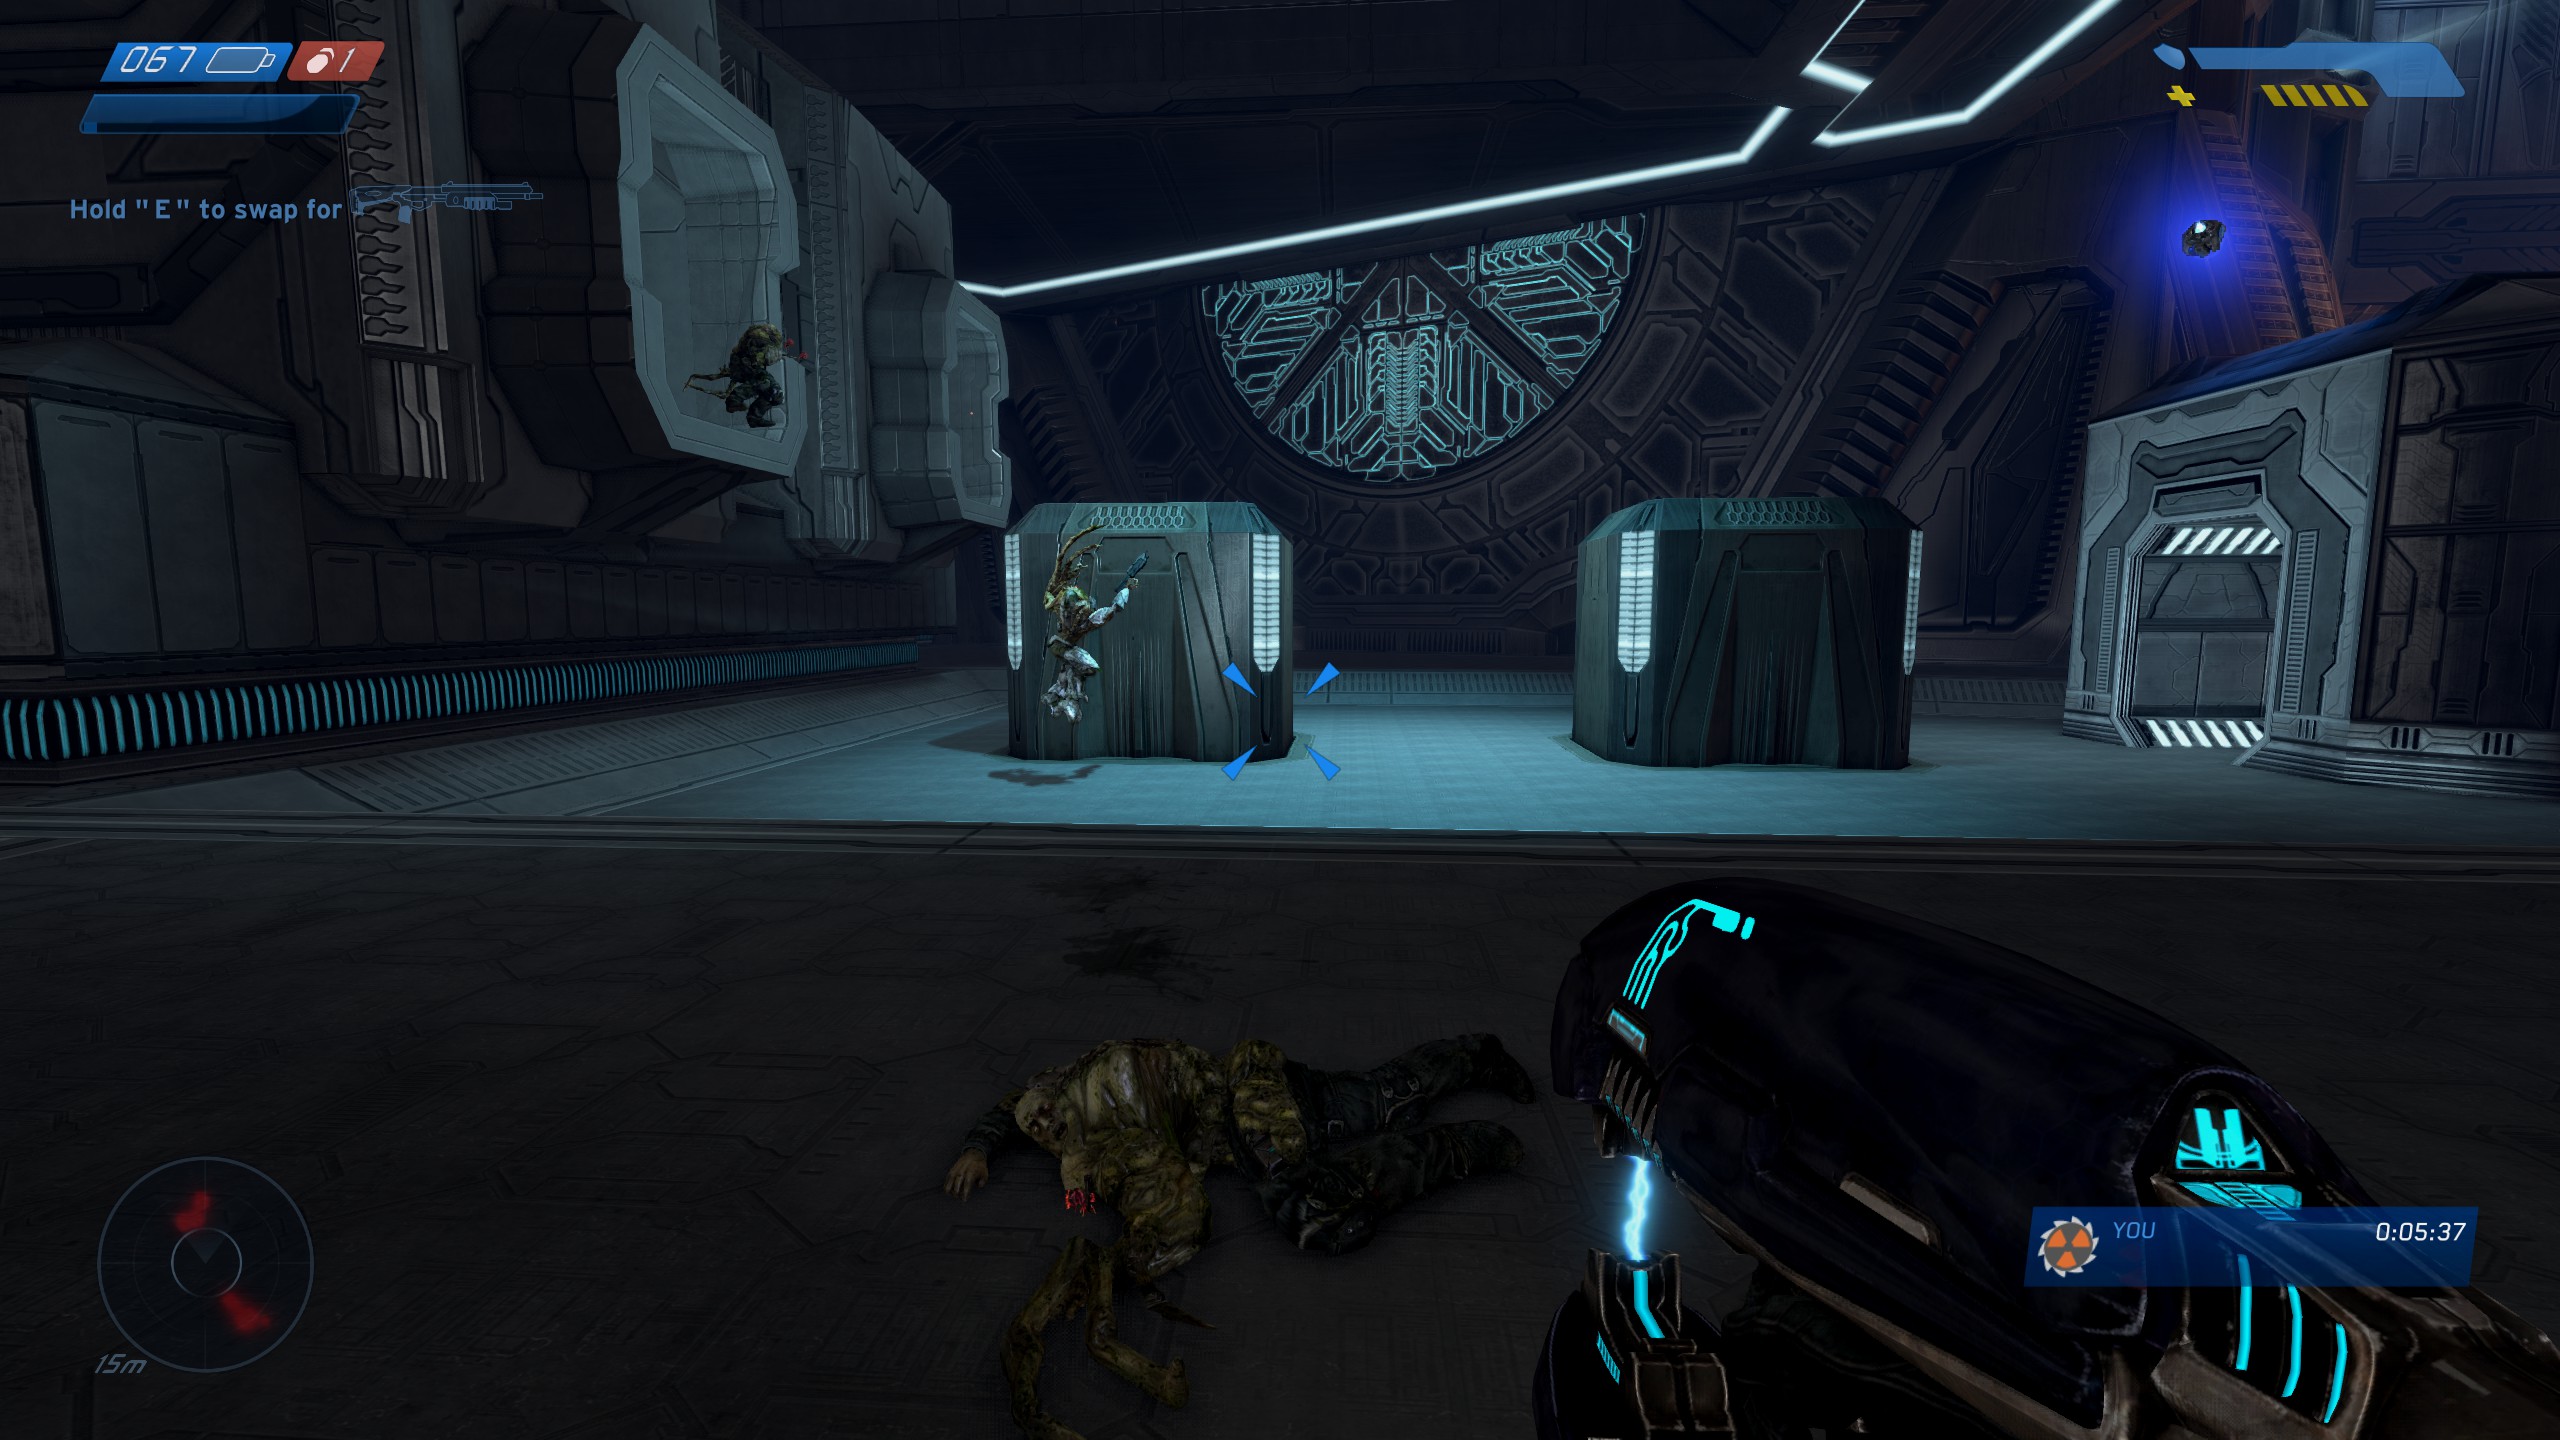 Steam Community :: Guide :: Halo Combat Evolved: Collectibles